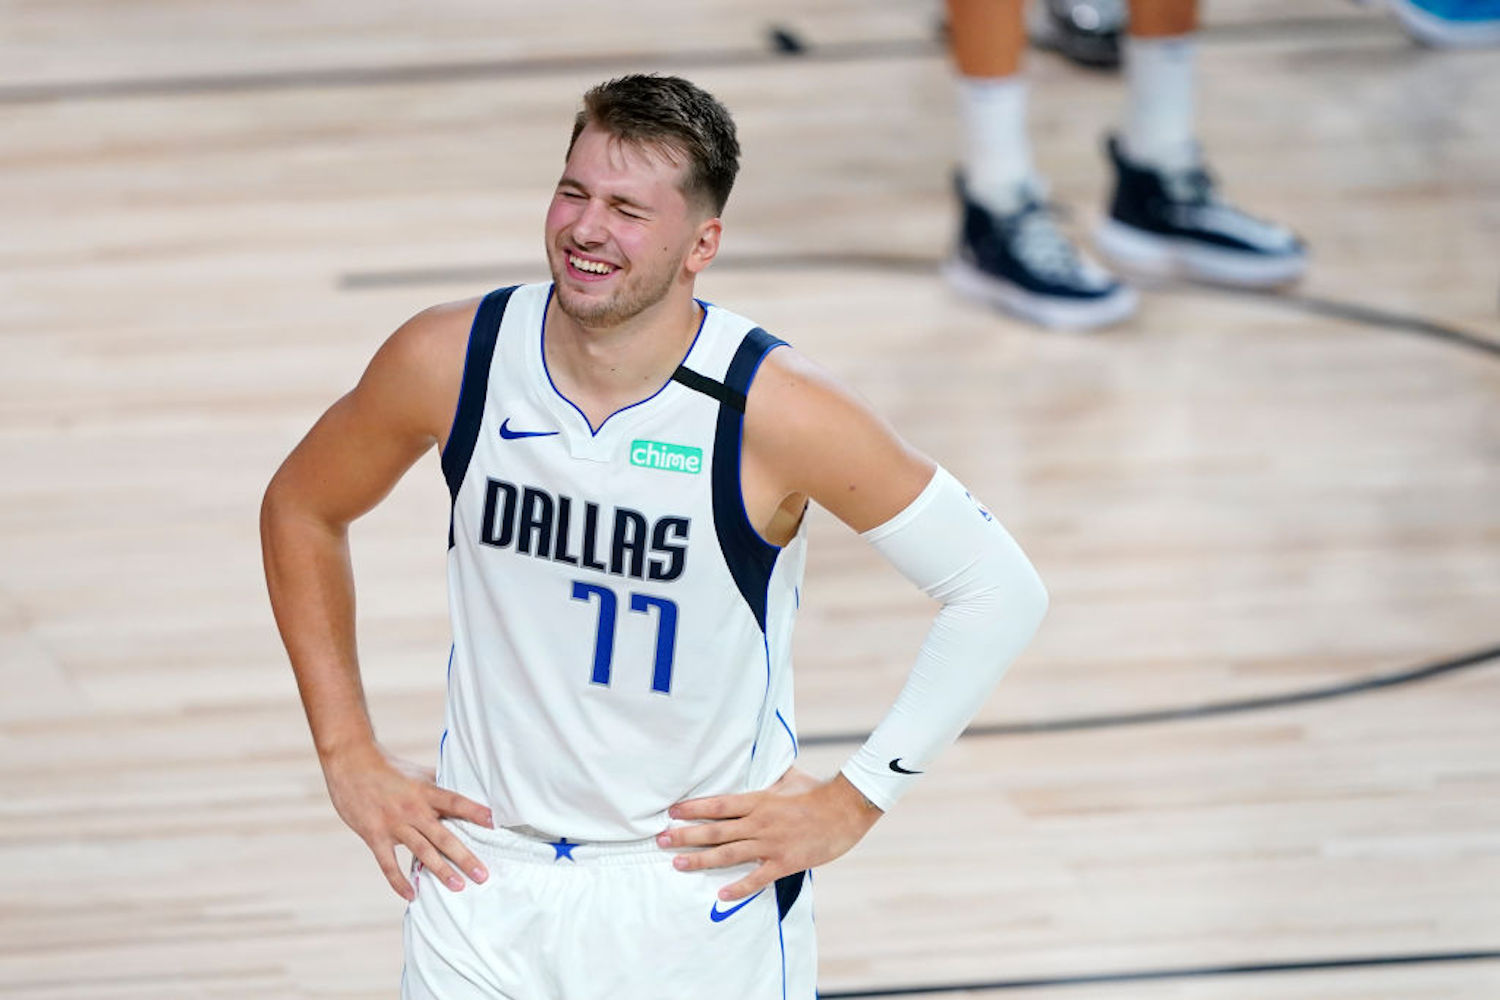 Luka Doncic is just 21 years old, but he already passed Lakers legend Kareem Abdul-Jabbar in the NBA playoff record books.